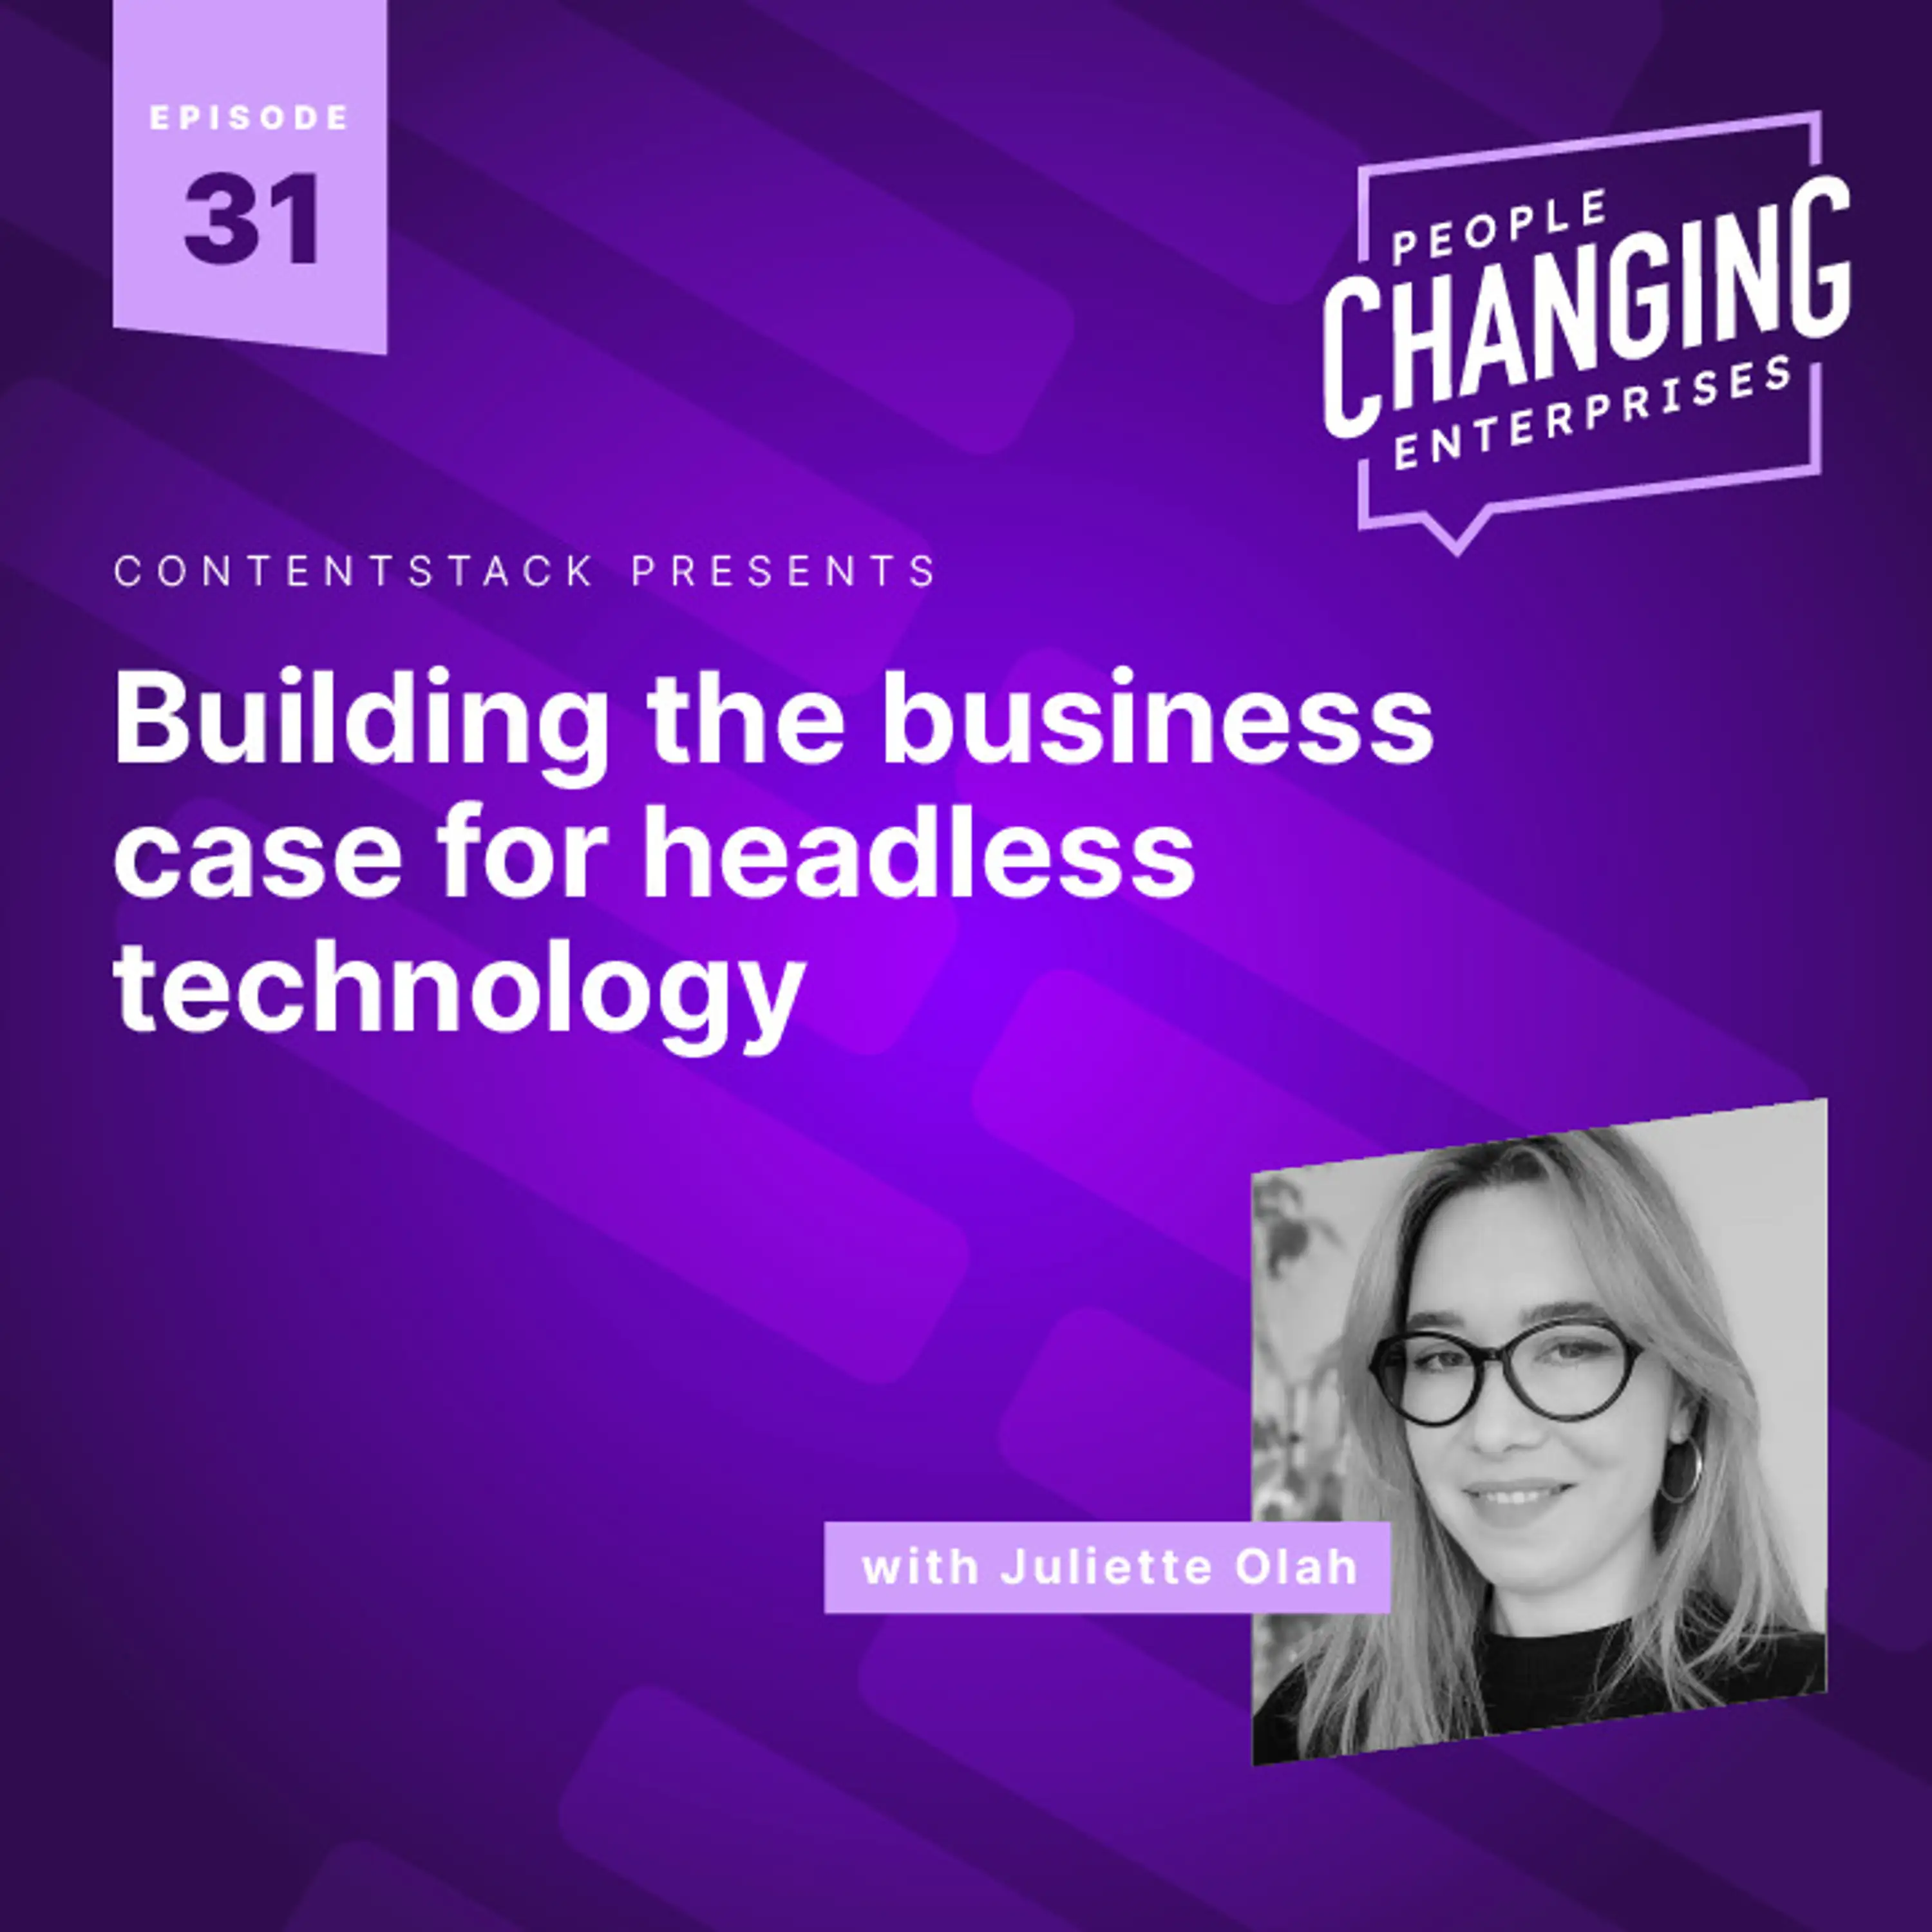 Building the business case for headless technology, with Booking